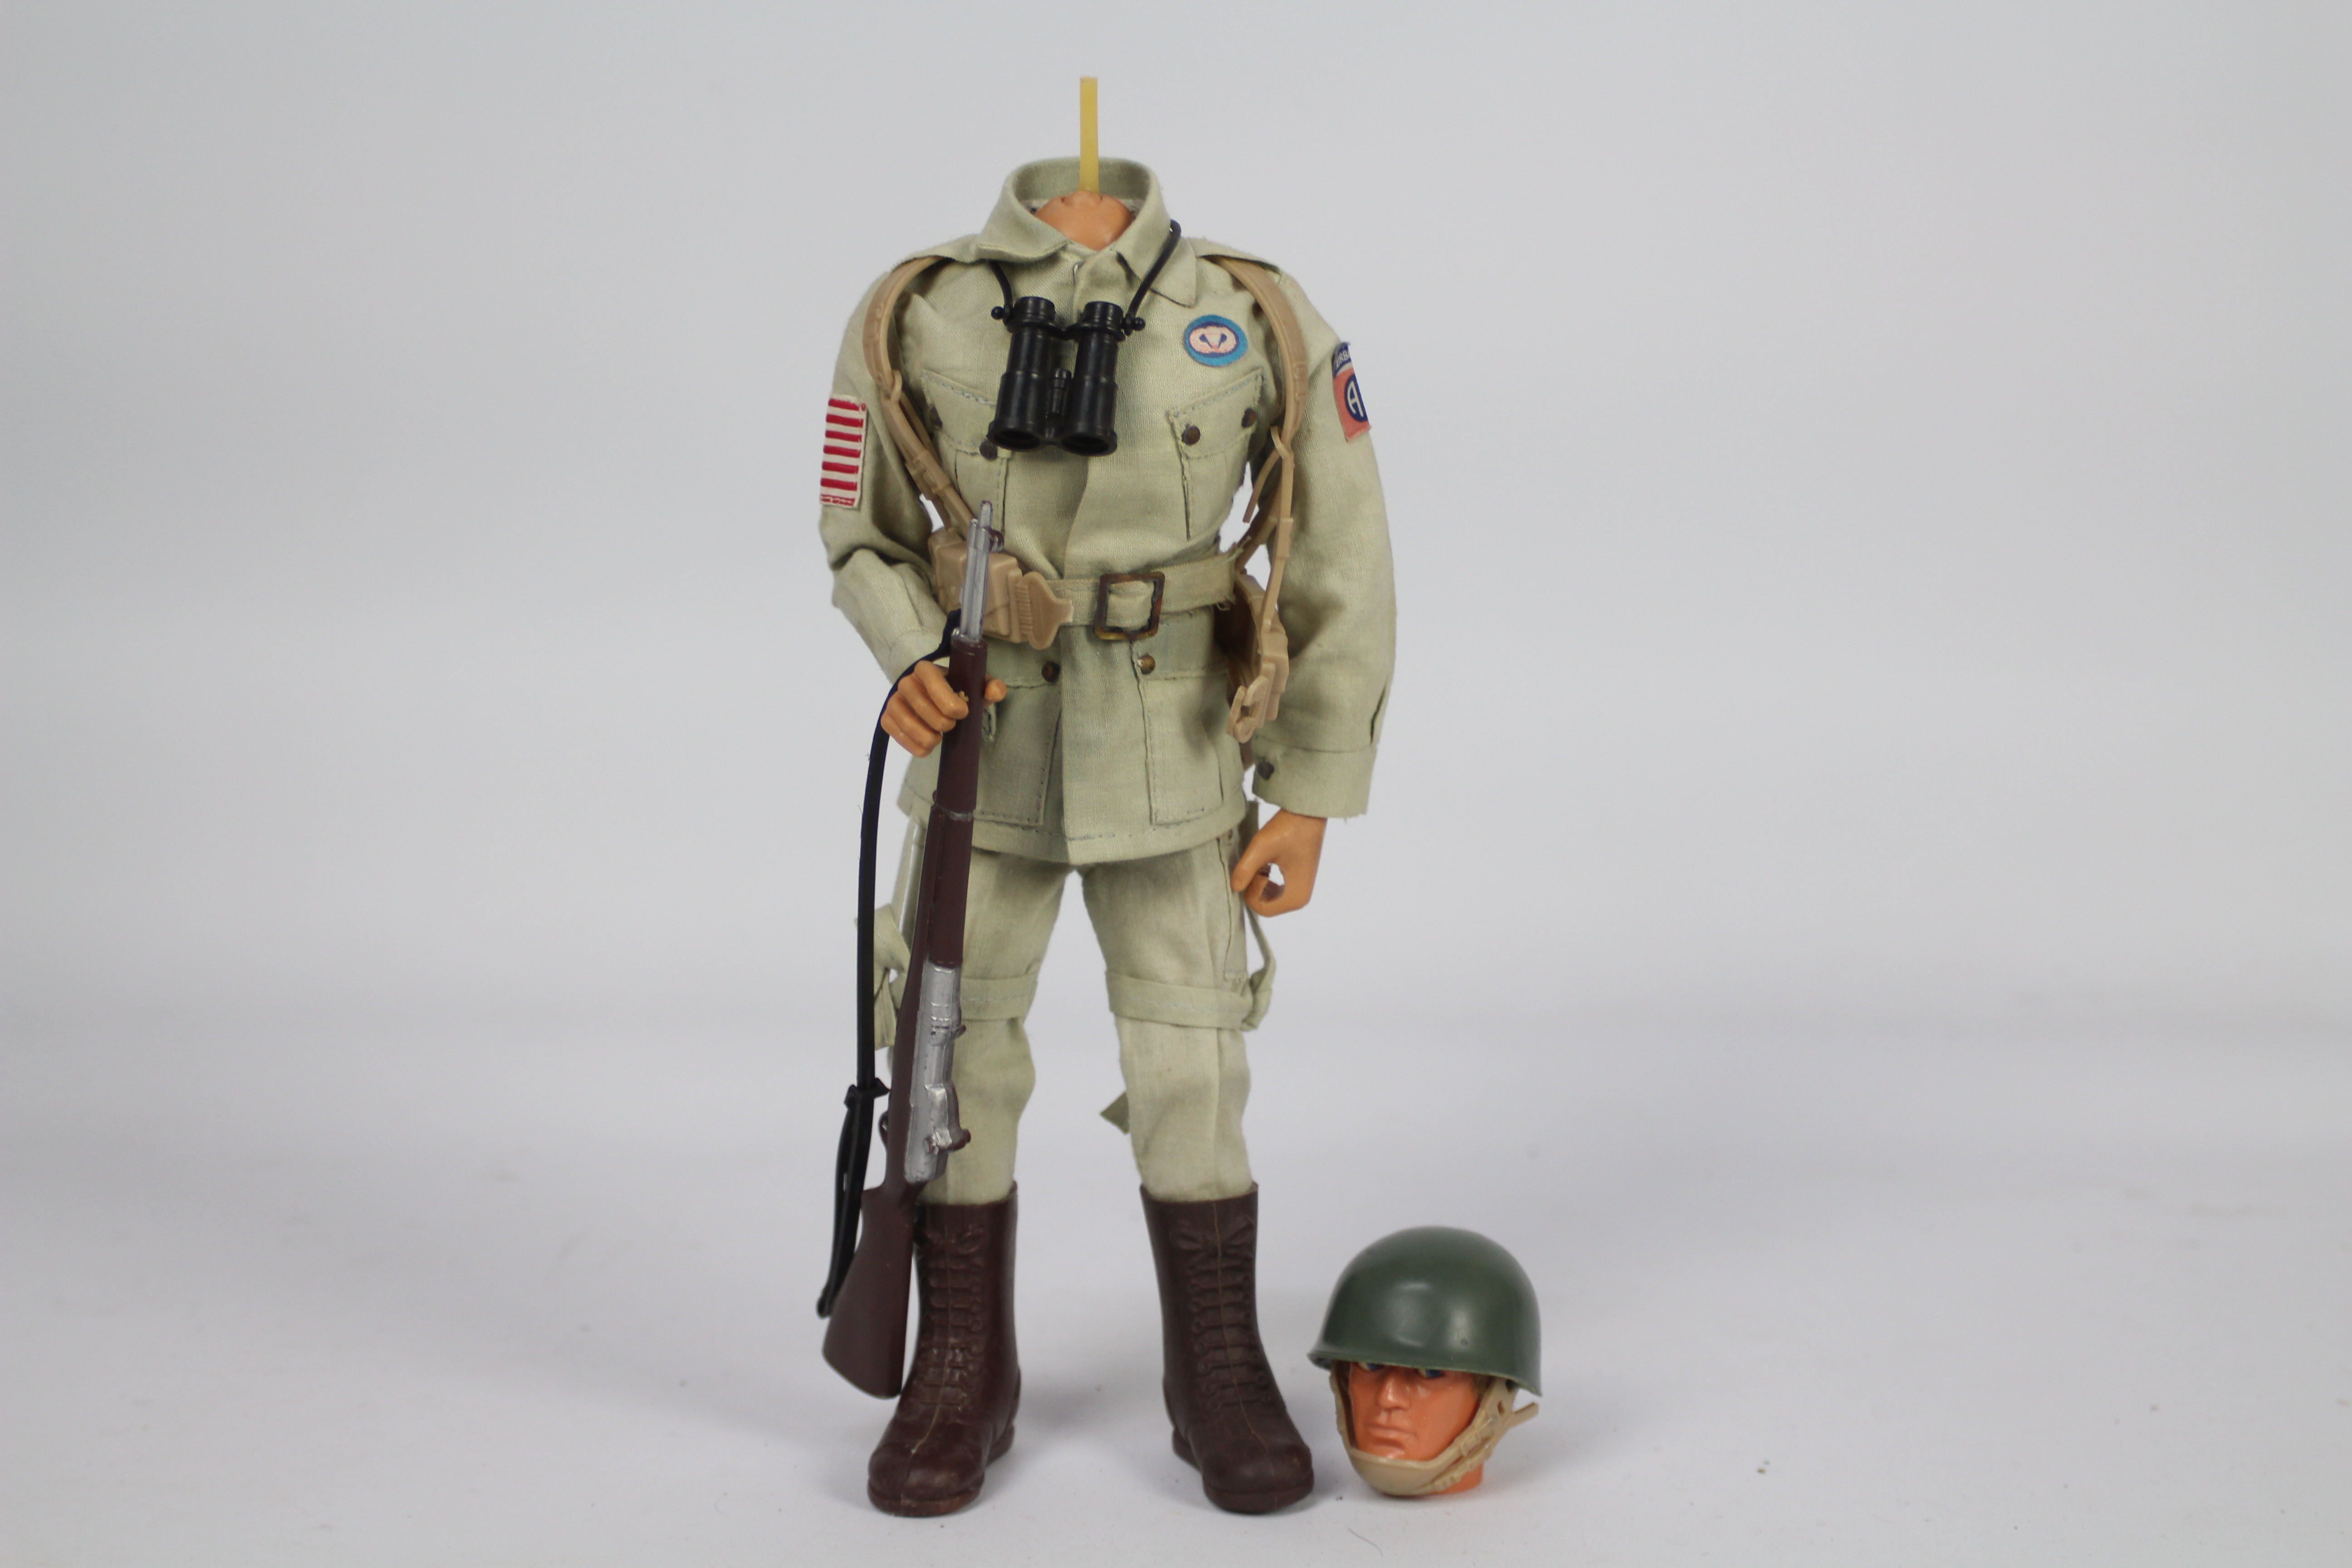 Palitoy, Action Man - A Palitoy Action Man figure in US Paratrooper outfit.